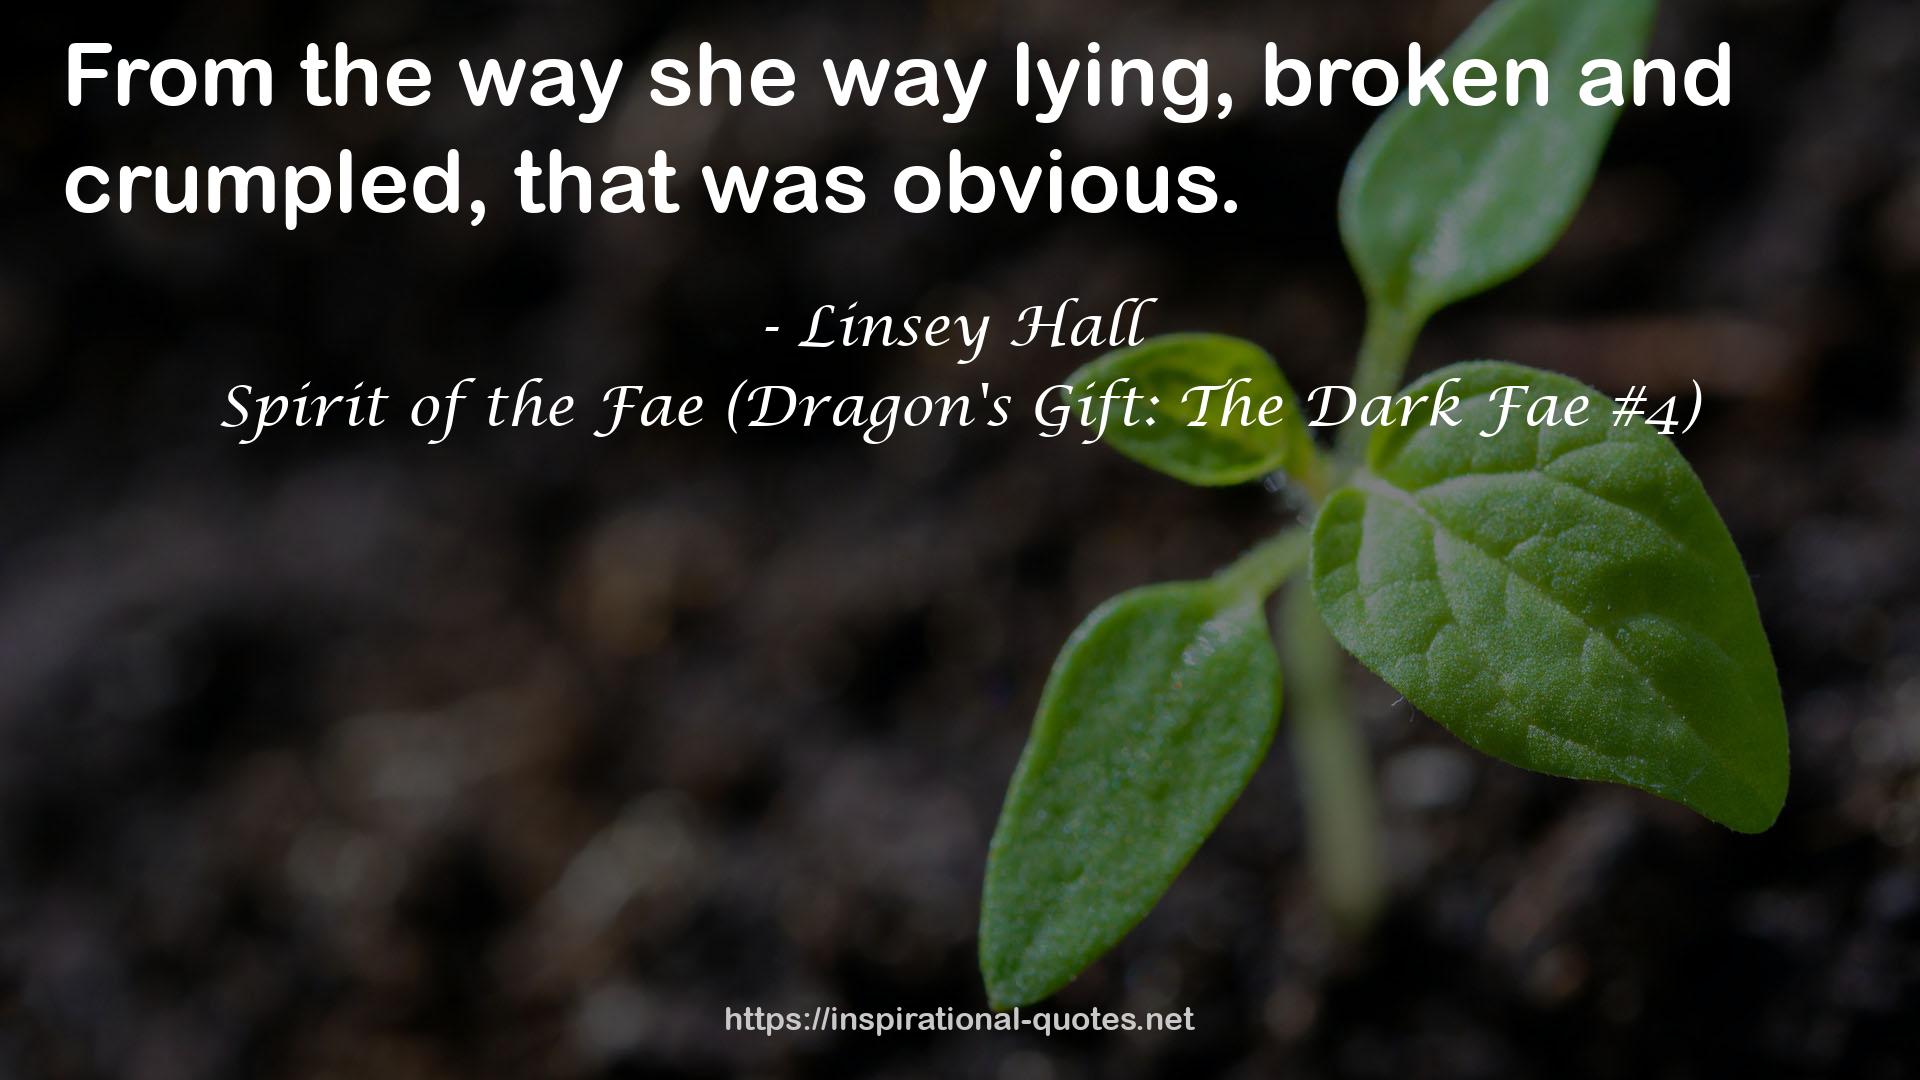 Spirit of the Fae (Dragon's Gift: The Dark Fae #4) QUOTES